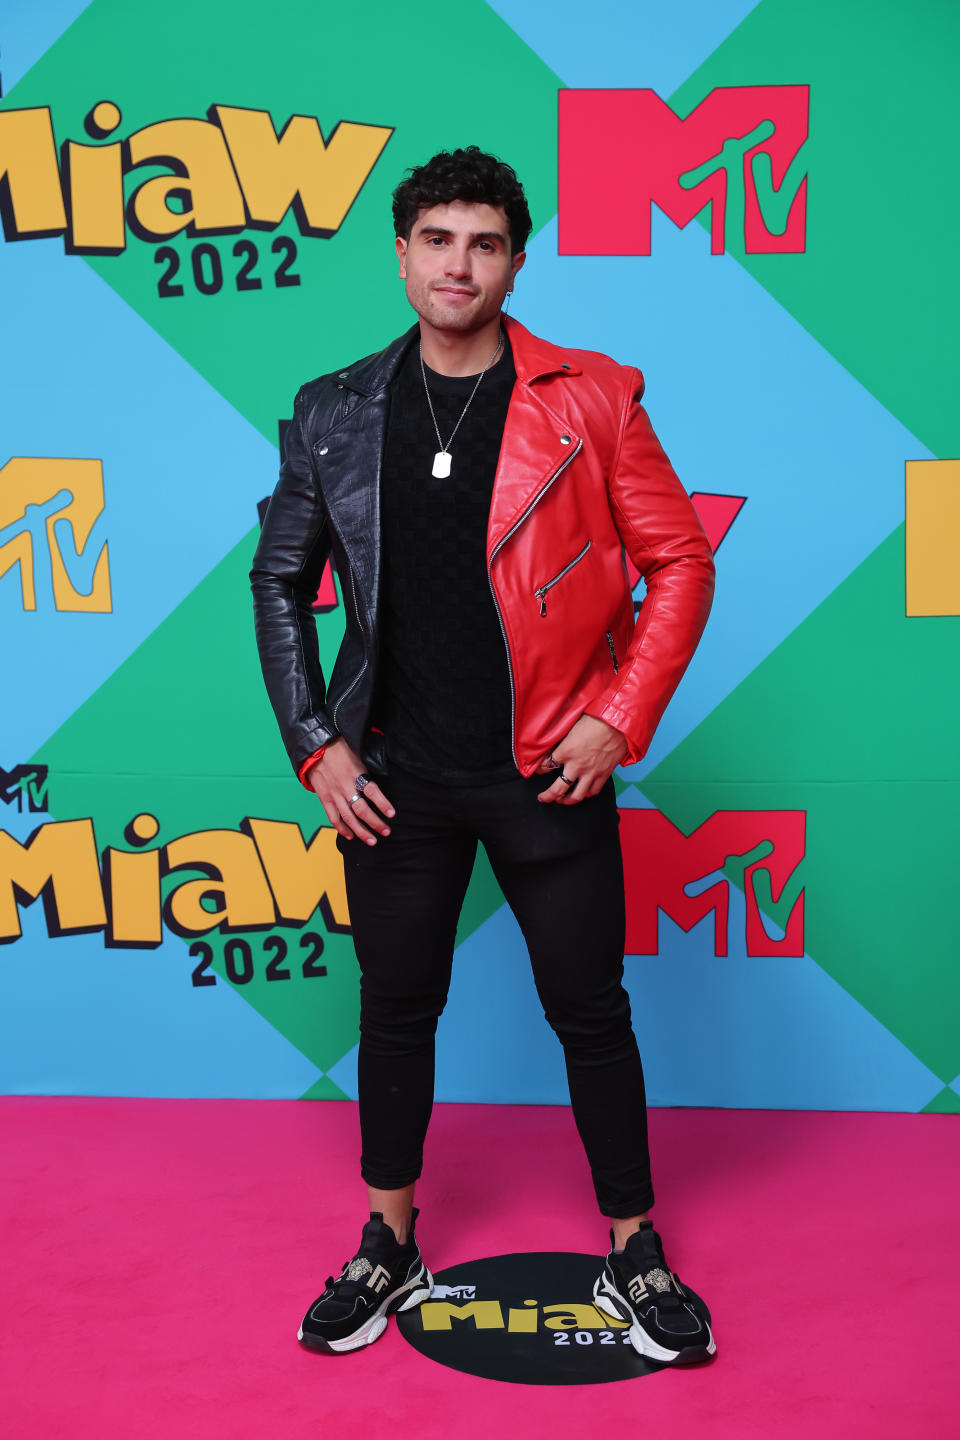 MEXICO CITY, MEXICO - JULY 08: Santiago Santana poses during the red carpet as part of the MTV MIAW 2022 at Pepsi Center WTC on July 08, 2022 in Mexico City, Mexico. (Photo by Hector Vivas/Getty Images)